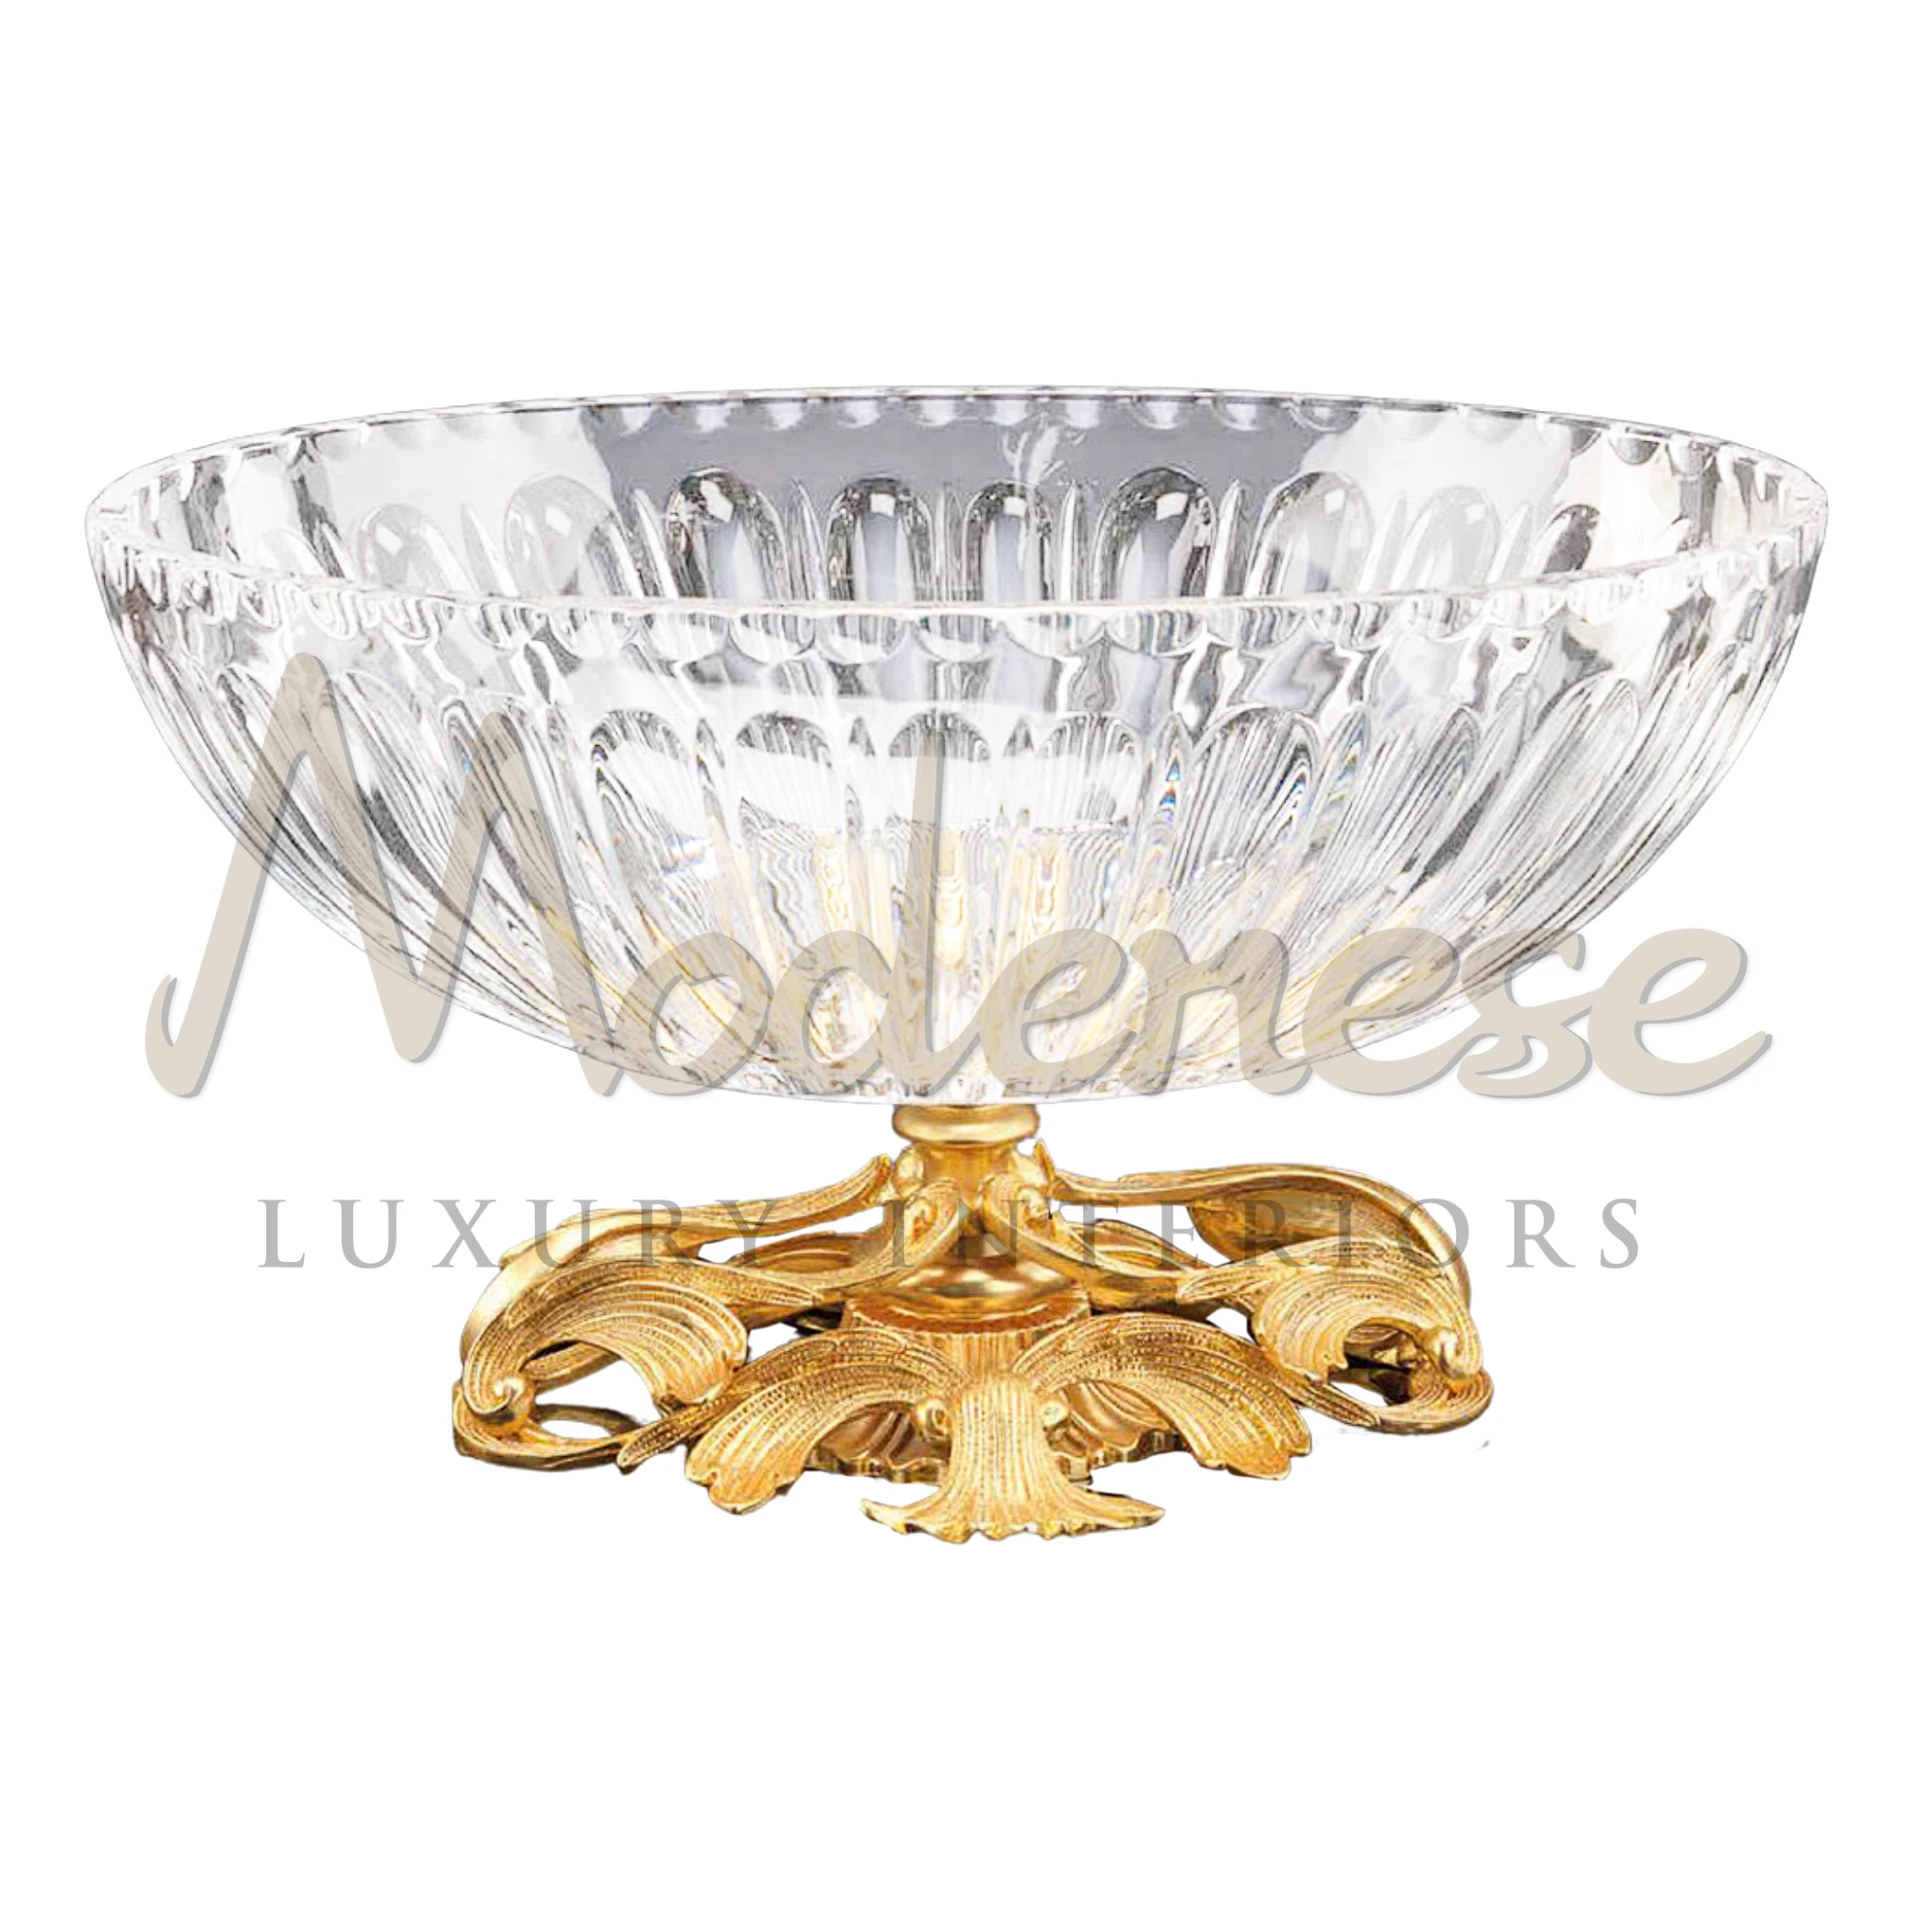 Gorgeous Giant Glass Bowl, featuring intricate detailing and high-quality craftsmanship, ideal for a luxurious and eye-catching interior accent.